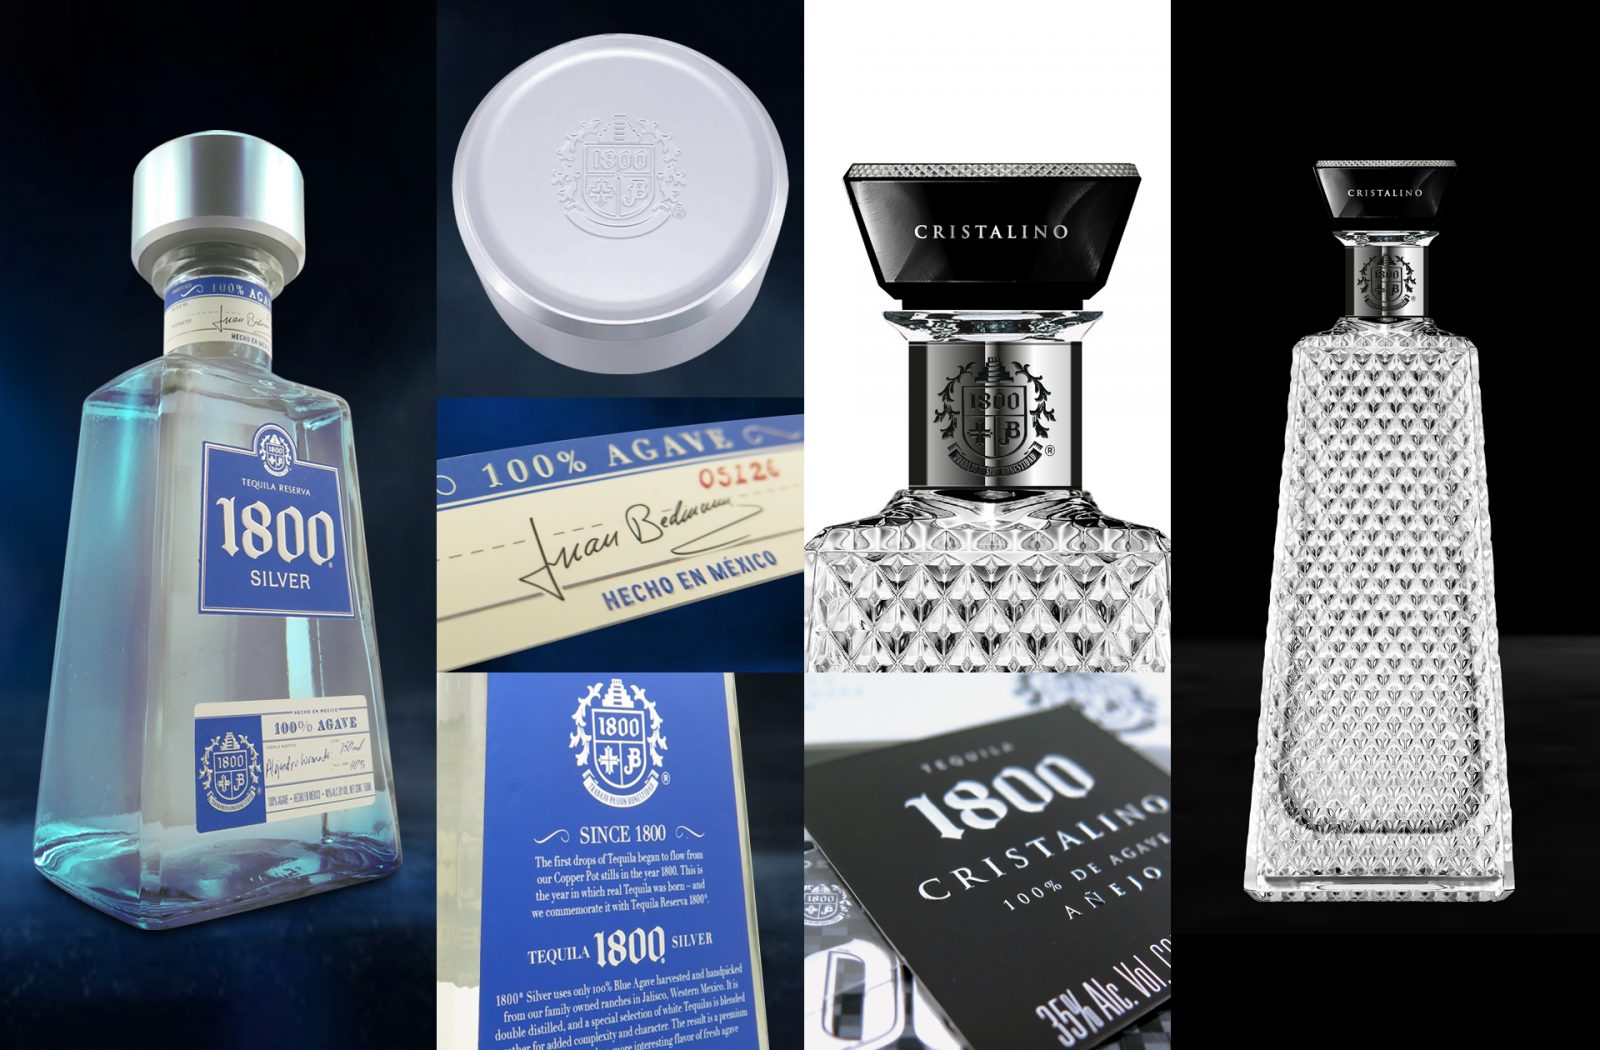 Collage of close-up product photography of proximo spirits 1800 silver and cristalino, showcasing metallic inks and embossed features.